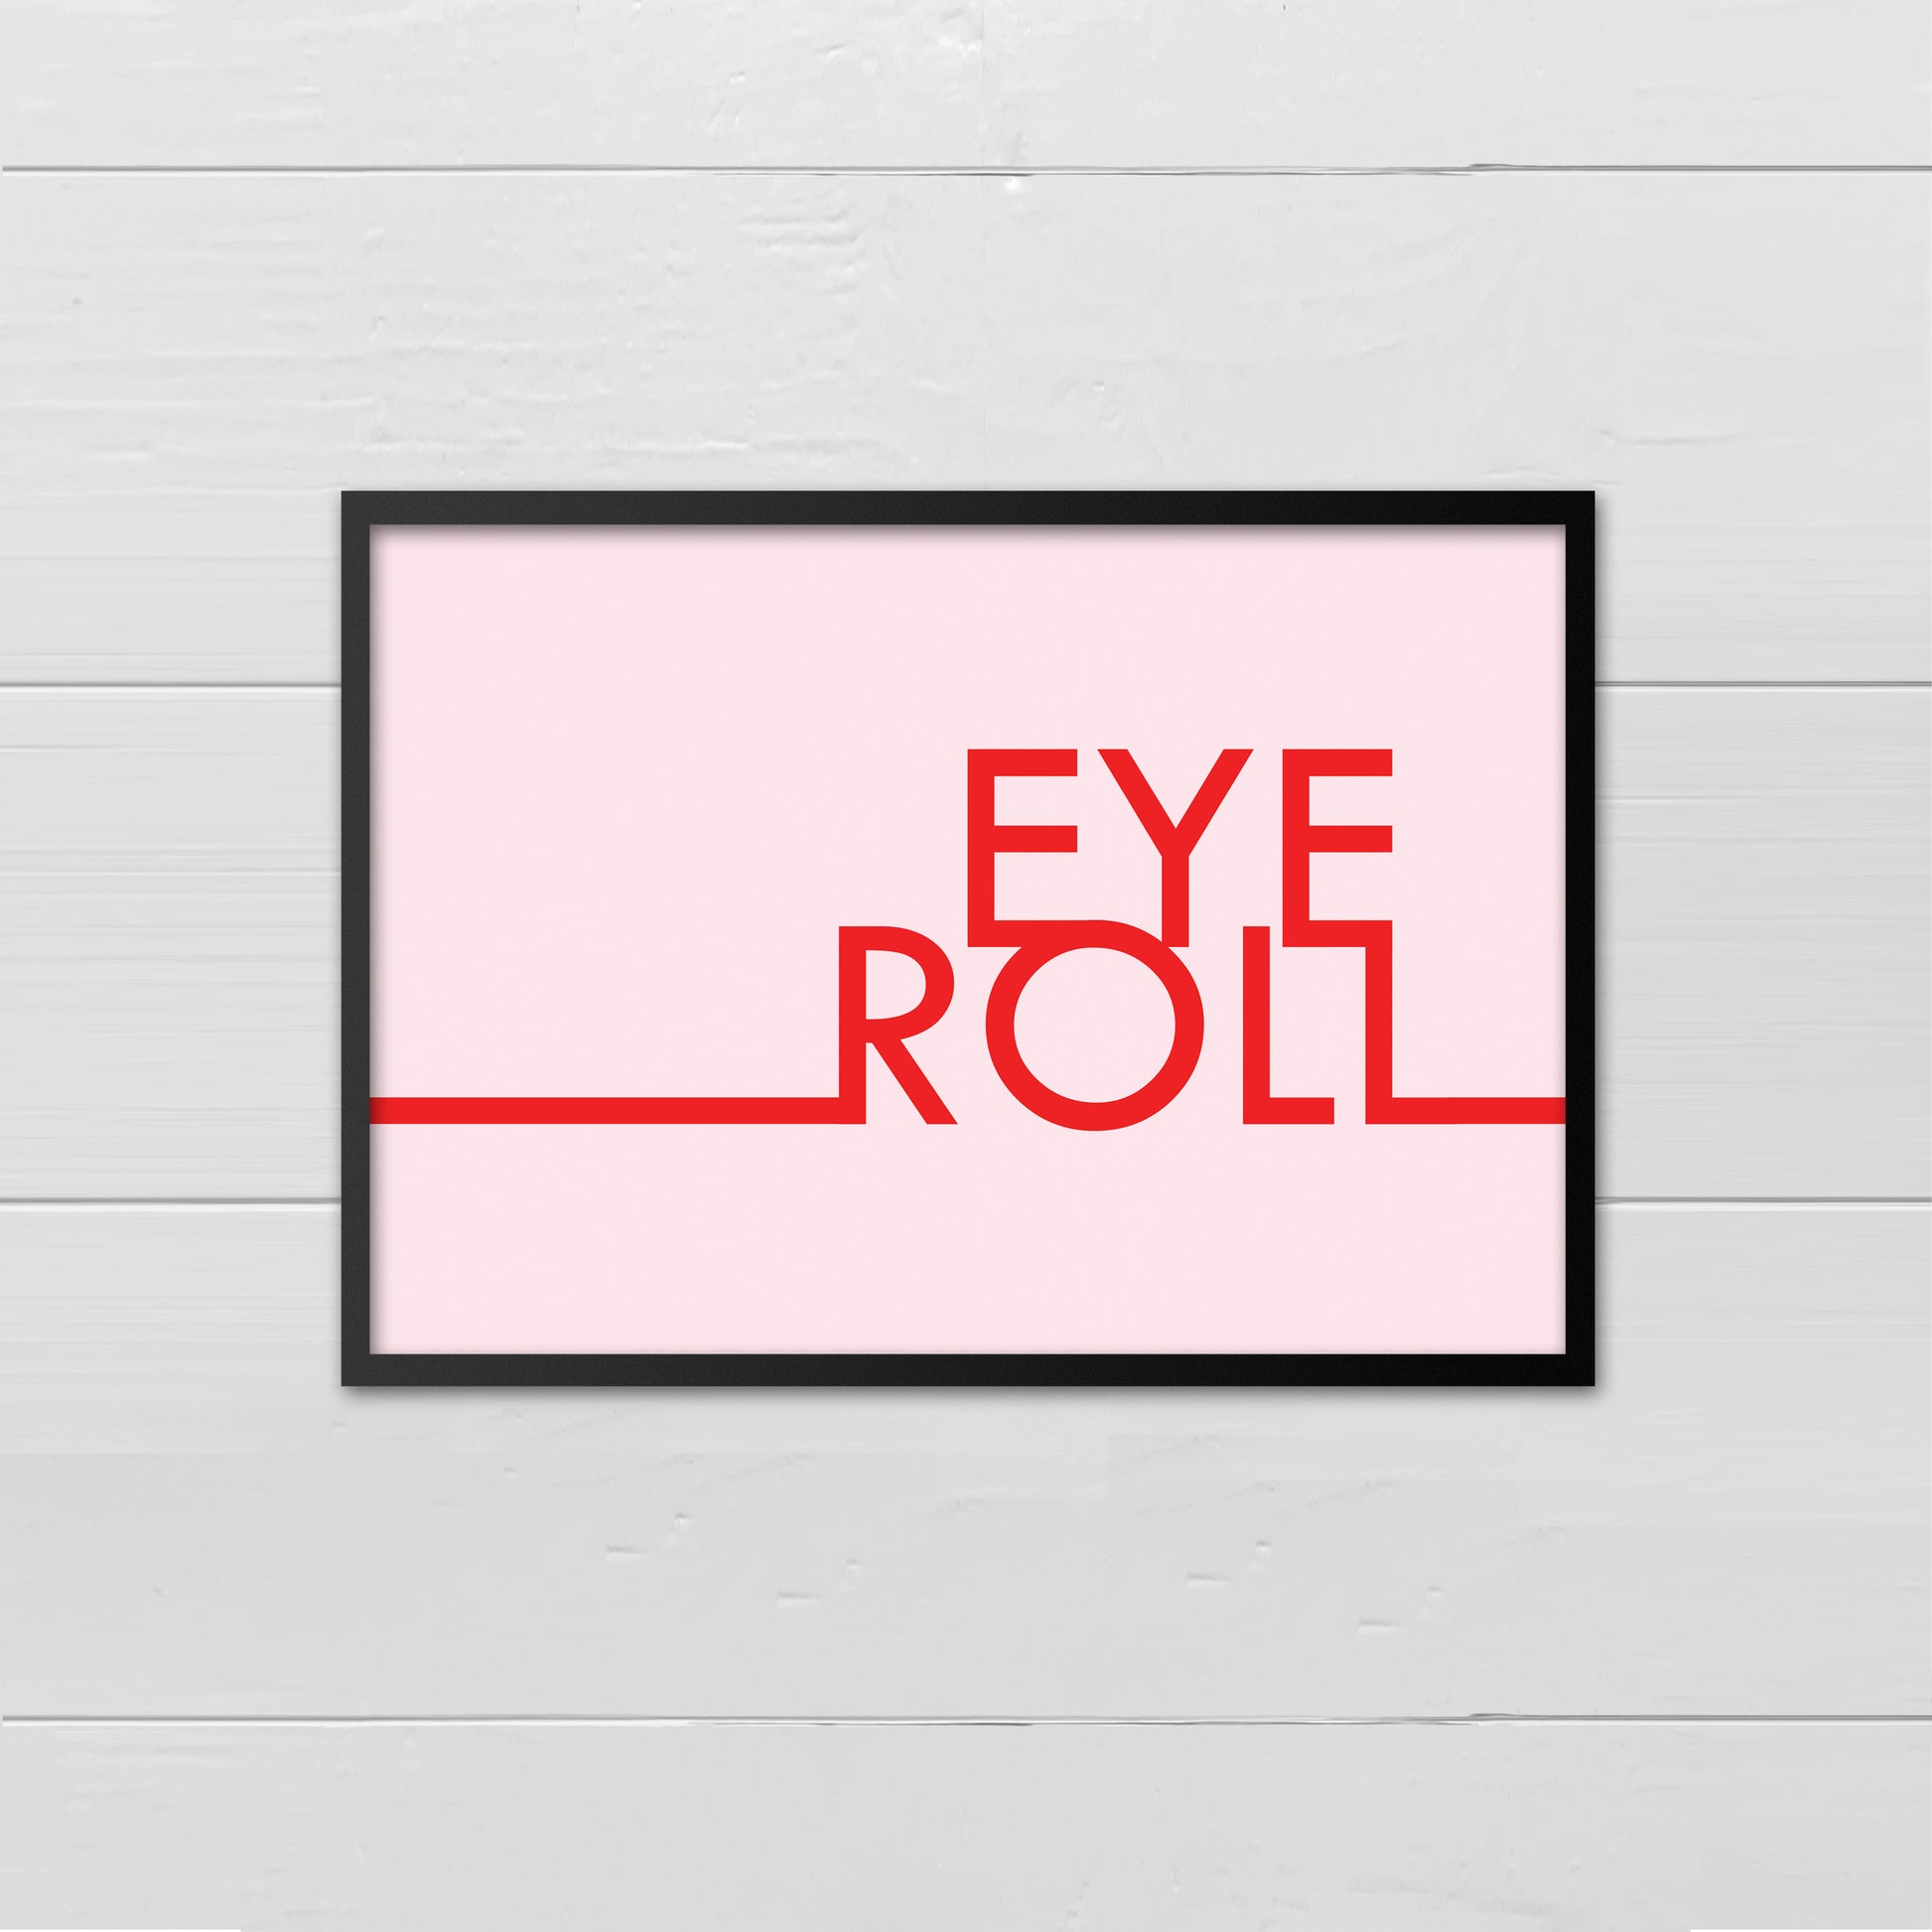 Landscape style print with the words Eye Roll, aligned to the right in red upper case letters on to a pale pink background. A red line extends horizontally from letters two thirds of the way down